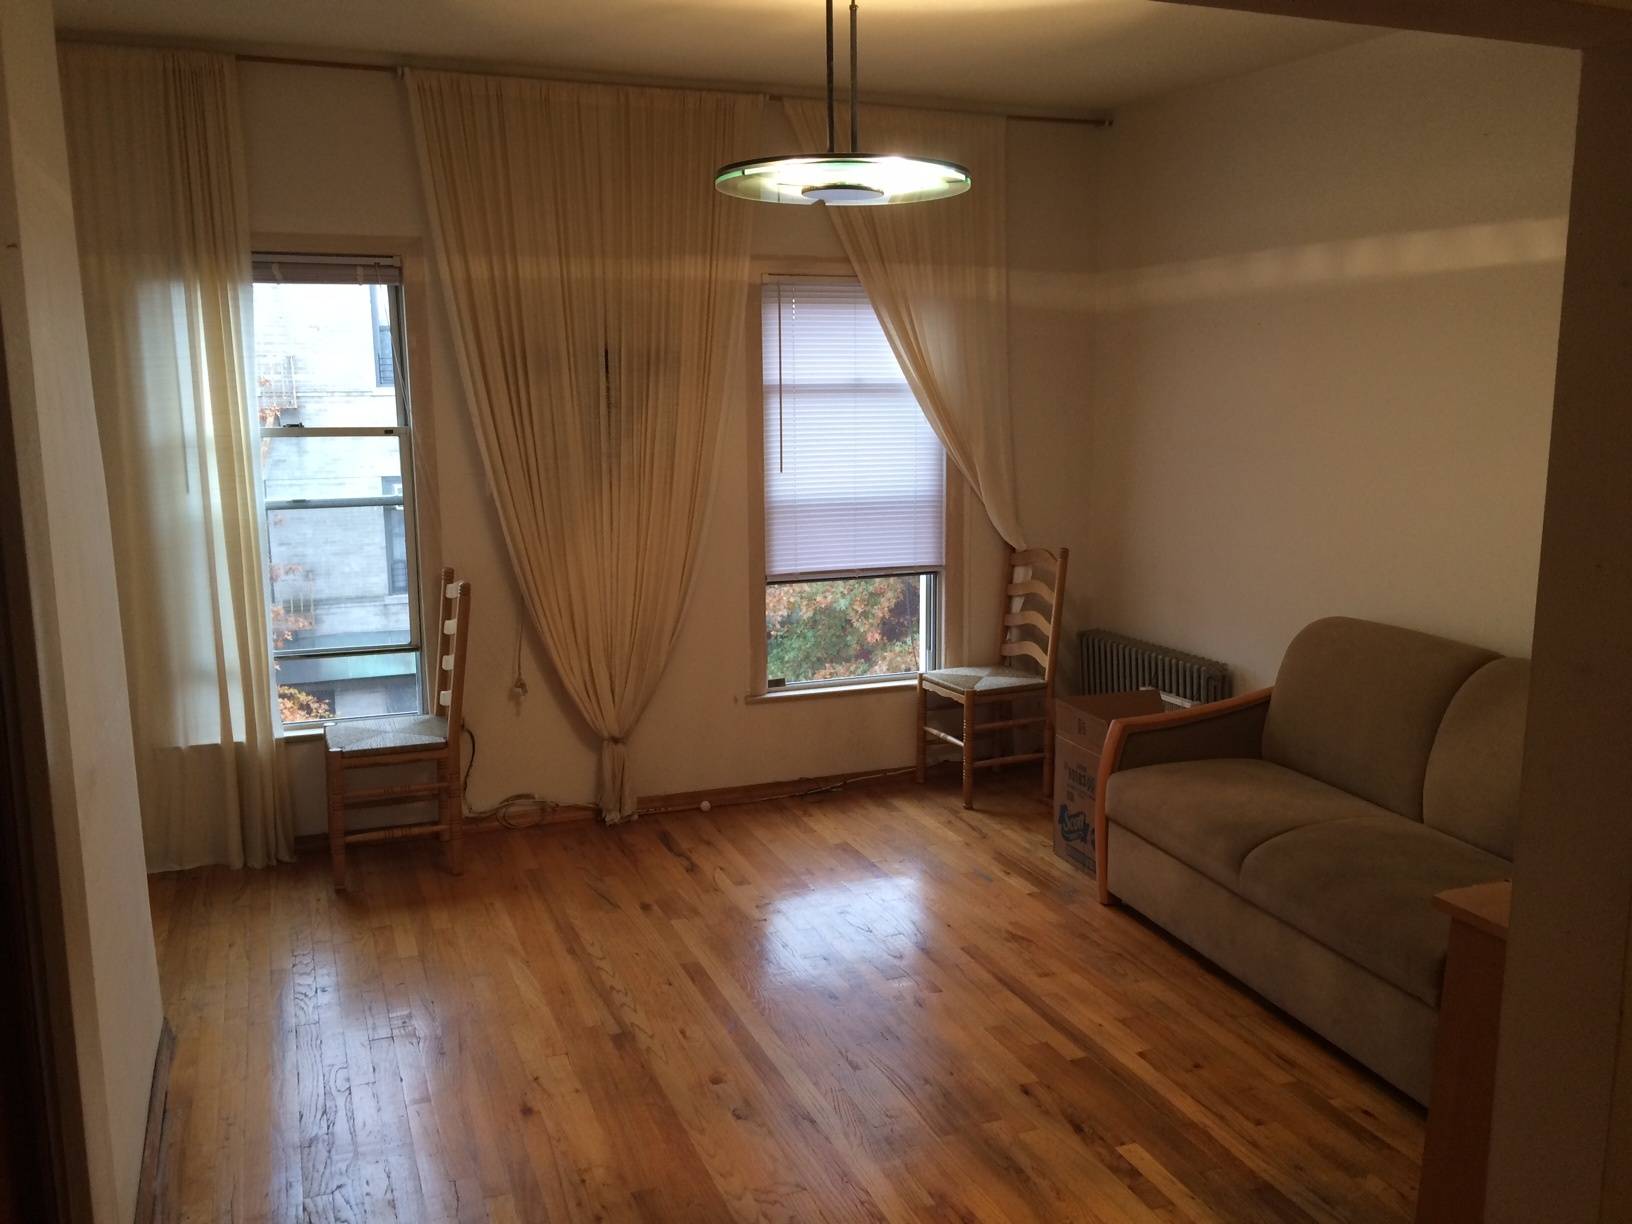 1 Bedroom in Greenpoint Close to the Bedford L train